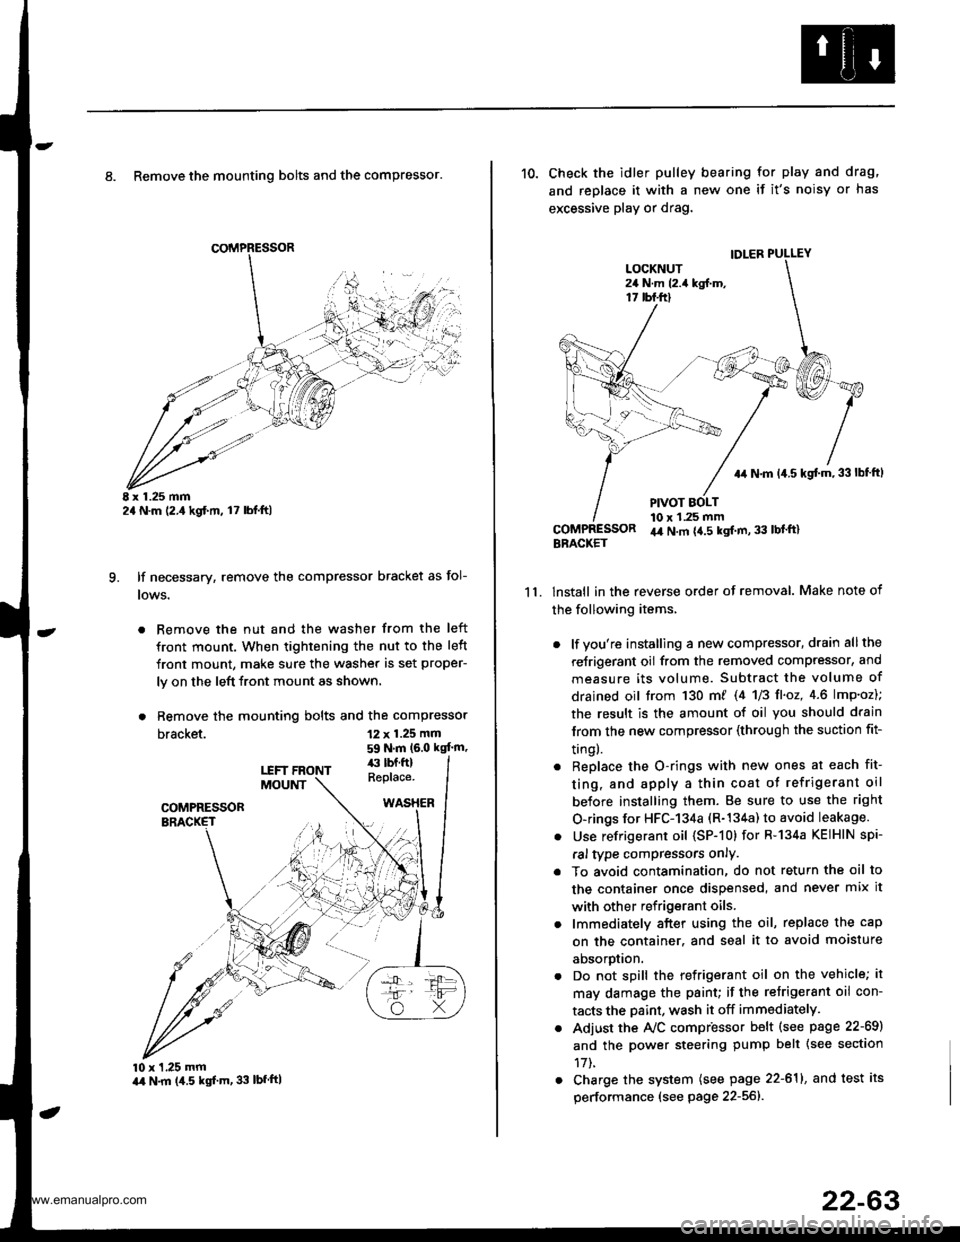 HONDA CR-V 1999 RD1-RD3 / 1.G Service Manual 
8. Remove the mounting bolts and the compressor.
E x 1.25 mm2a N.m (2.,1kgf.m, l7 lbl.ft)
lf necessary, remove the compressor bracket as fol-
lows.
. Remove the nut and the washer from the left
front